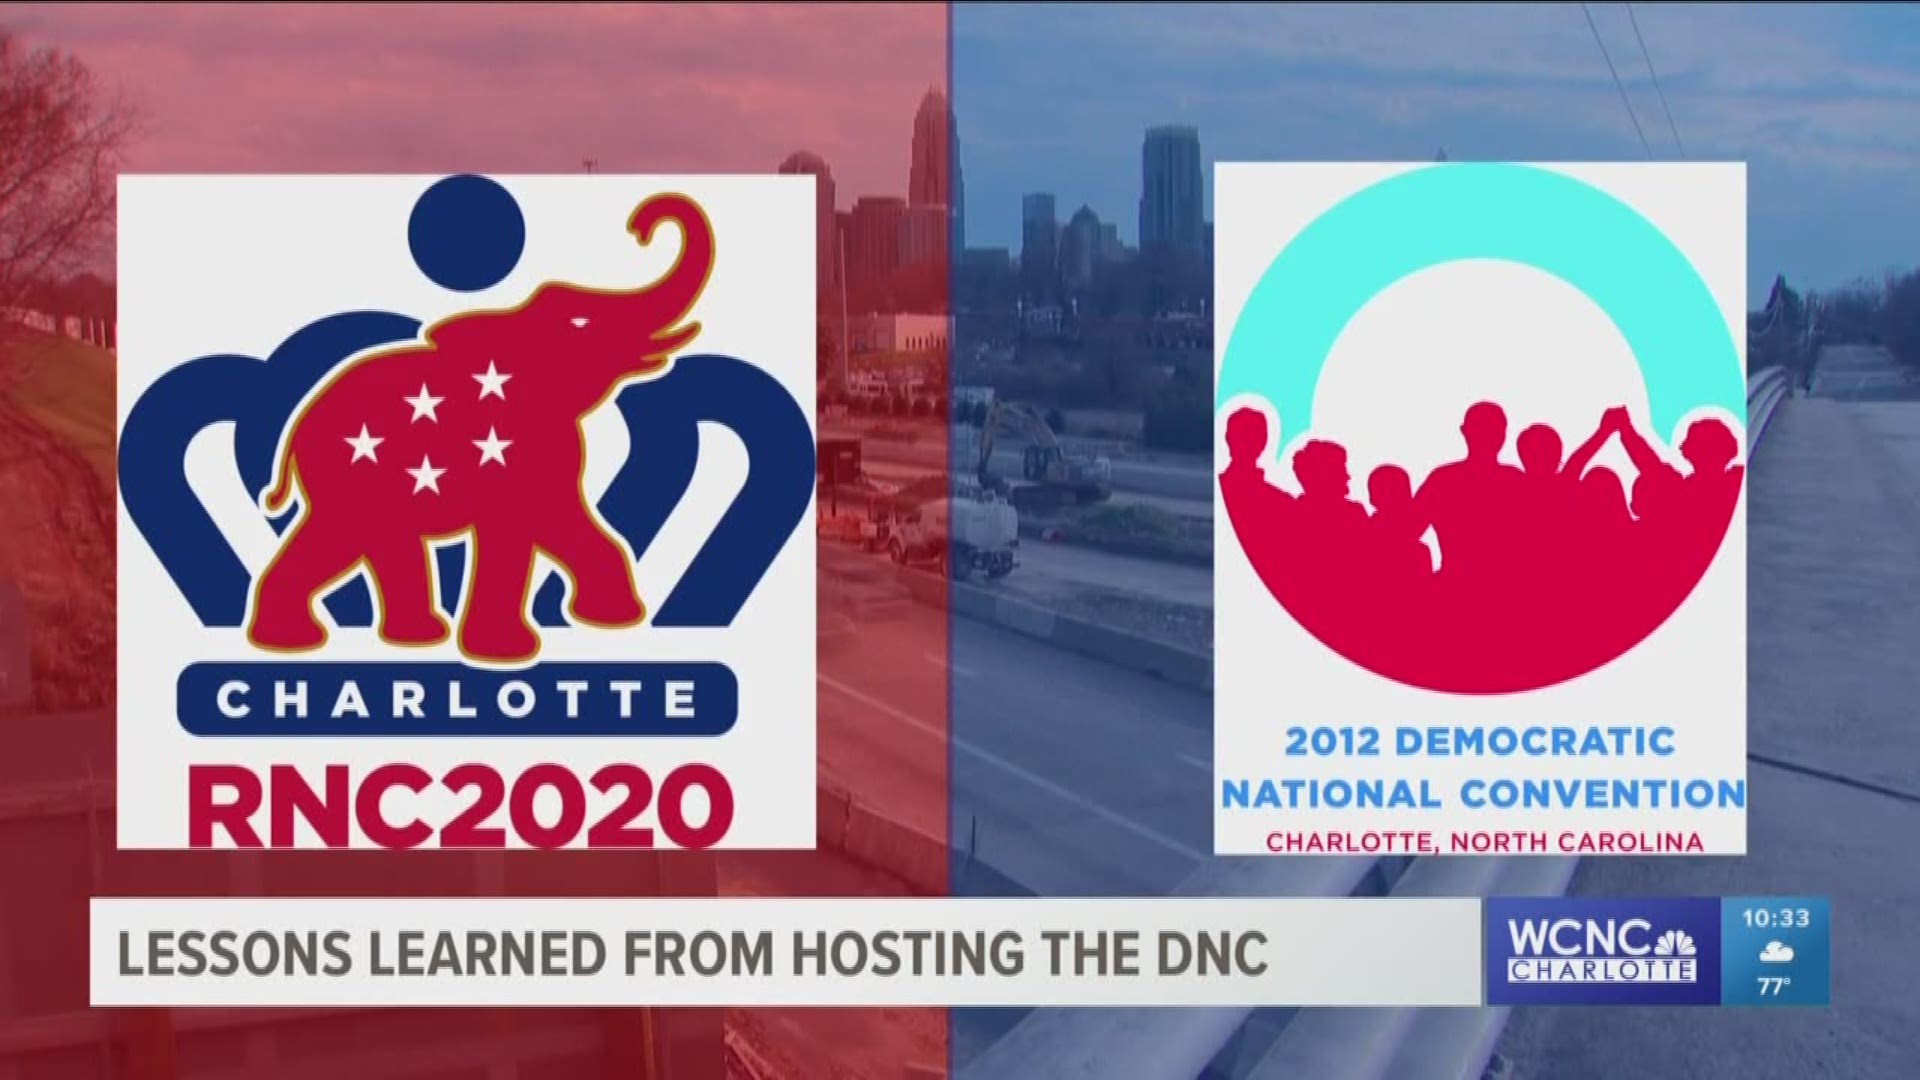 Charlotte has the benefit of having going through a dress rehearsal of sorts once before as the host of the 2012 Democratic National Convention.